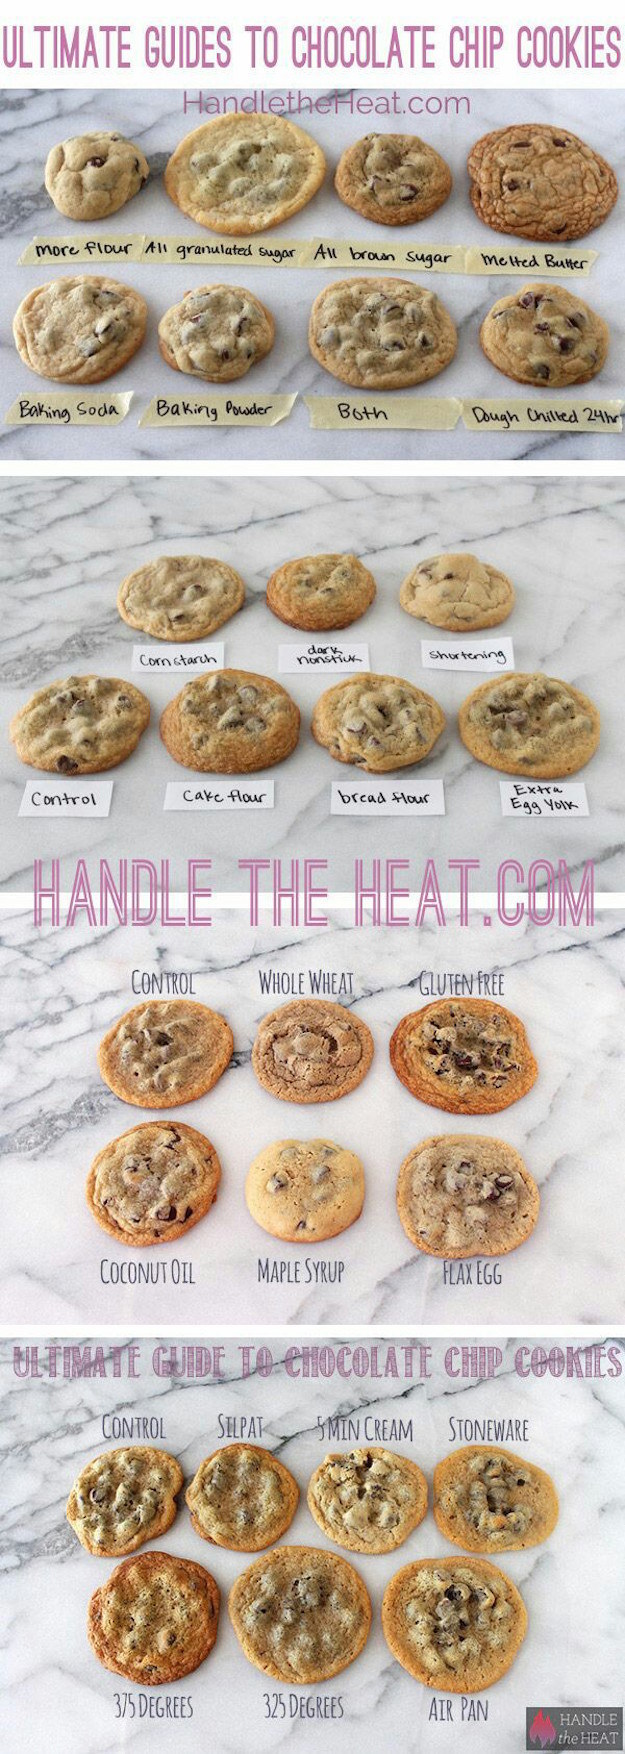 chocolate-chip-cookie-guide - AllCreated